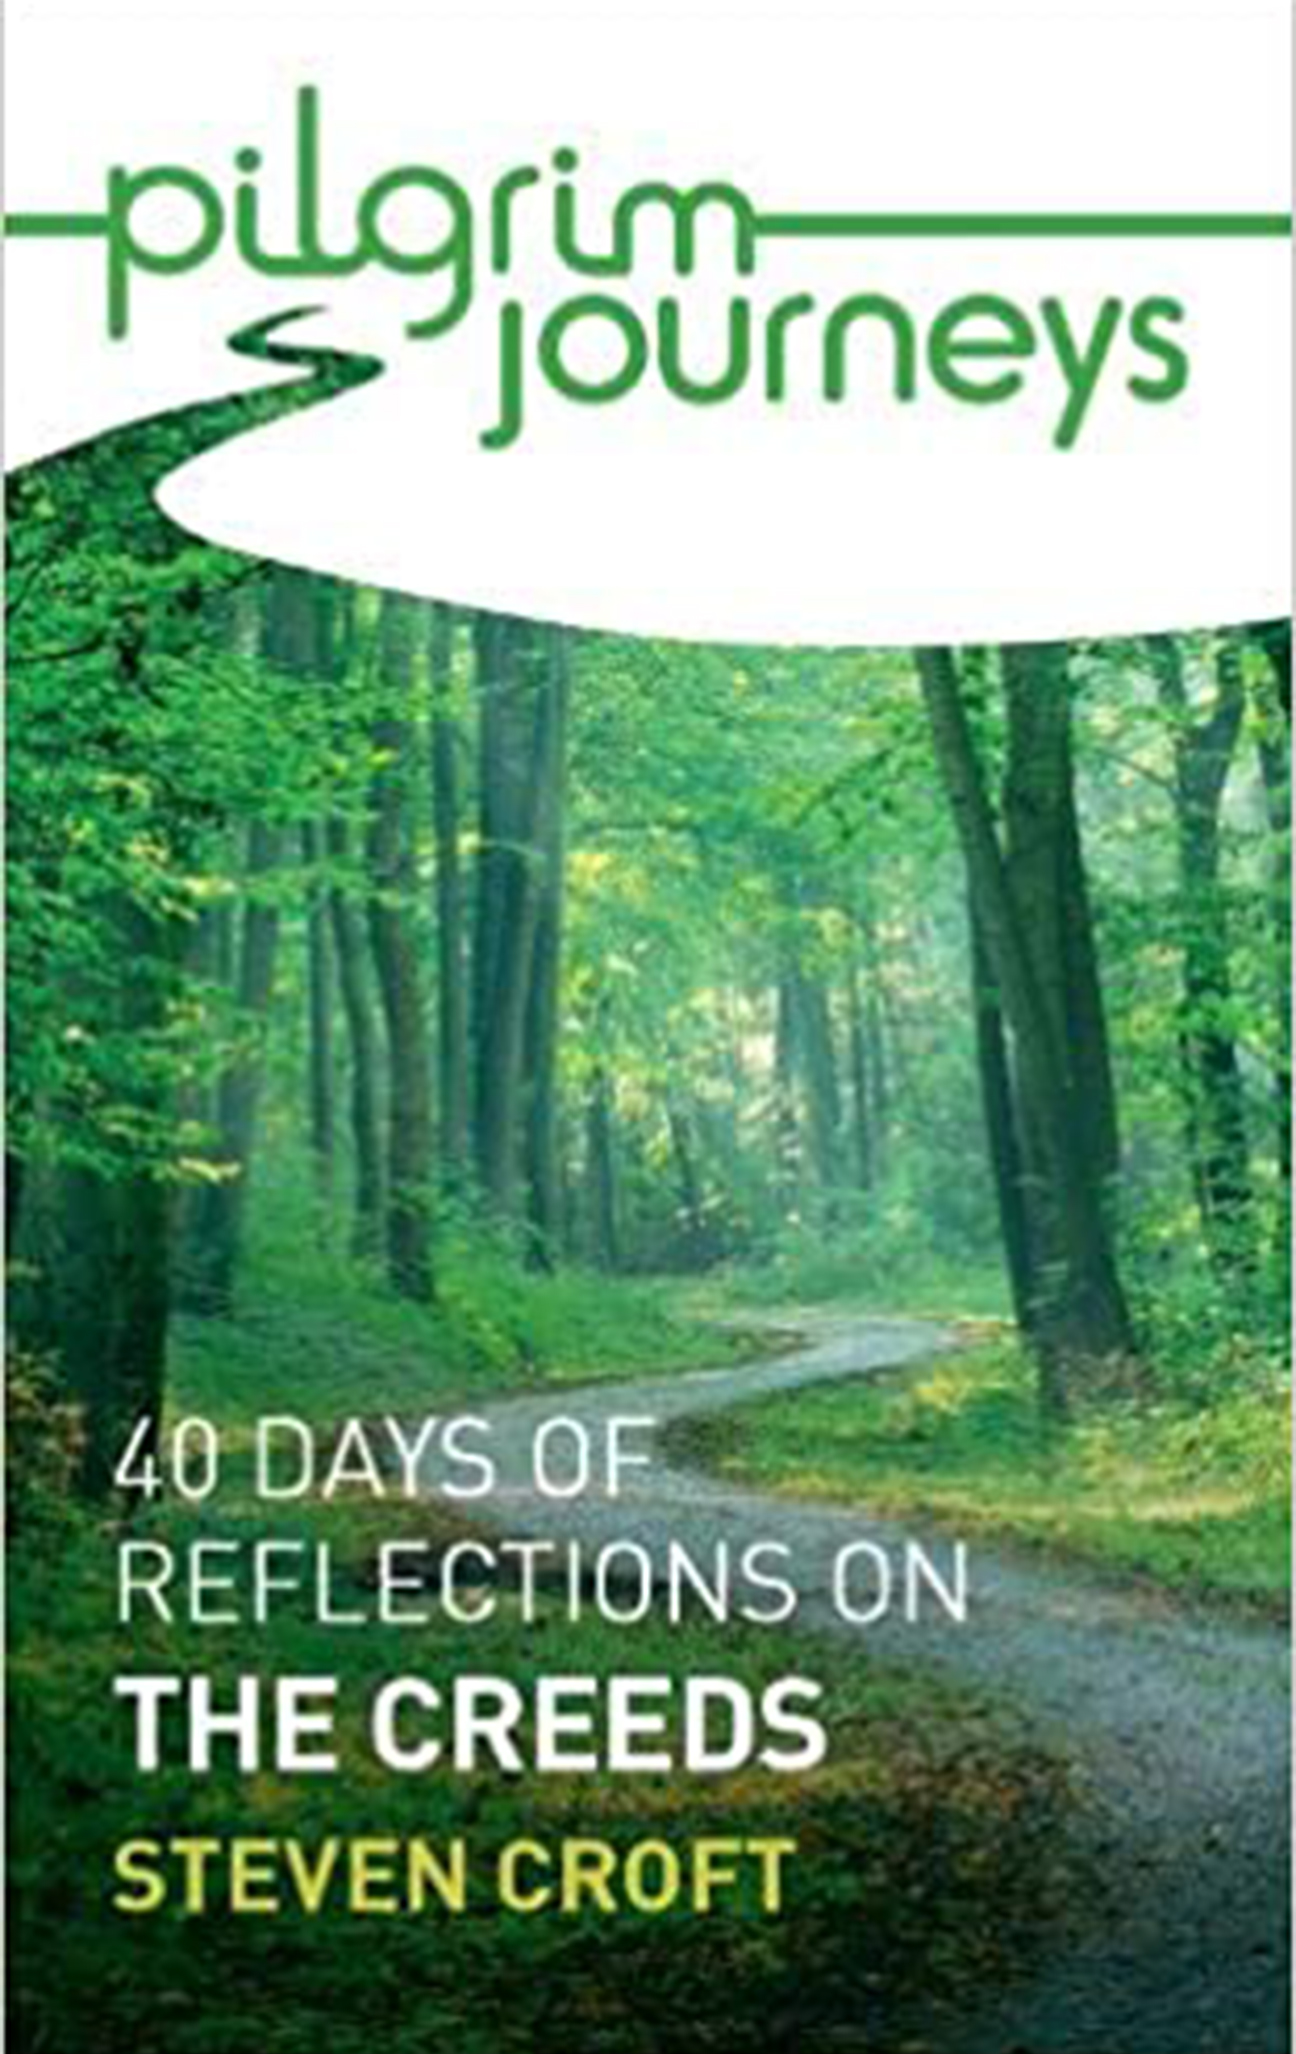 Pilgrim Journeys: 40 Days of Reflections on the Creeds